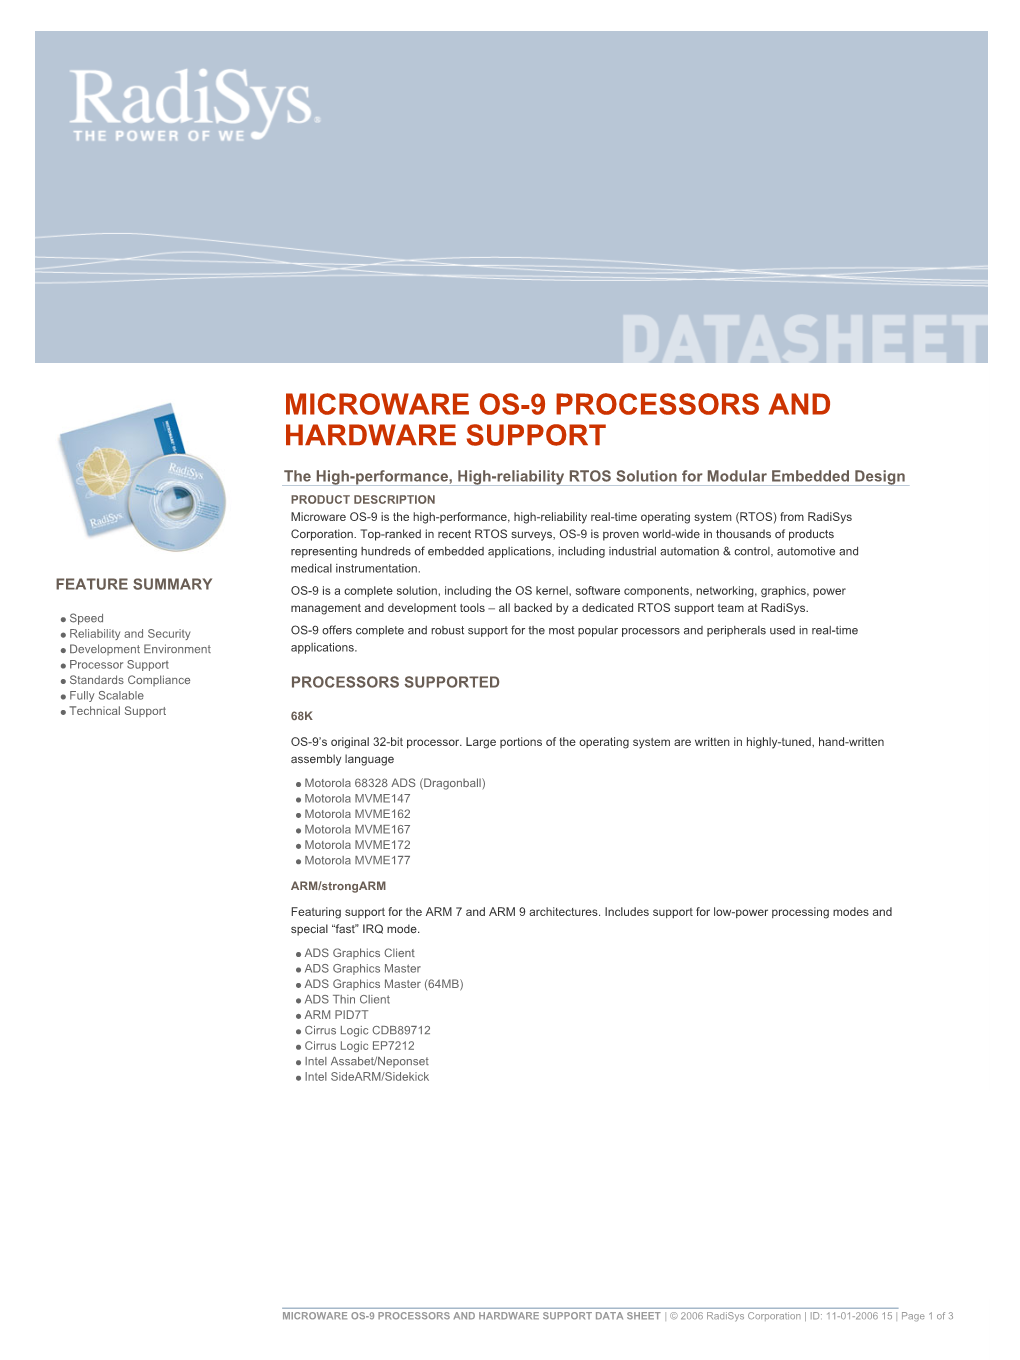 Microware Os-9 Processors and Hardware Support